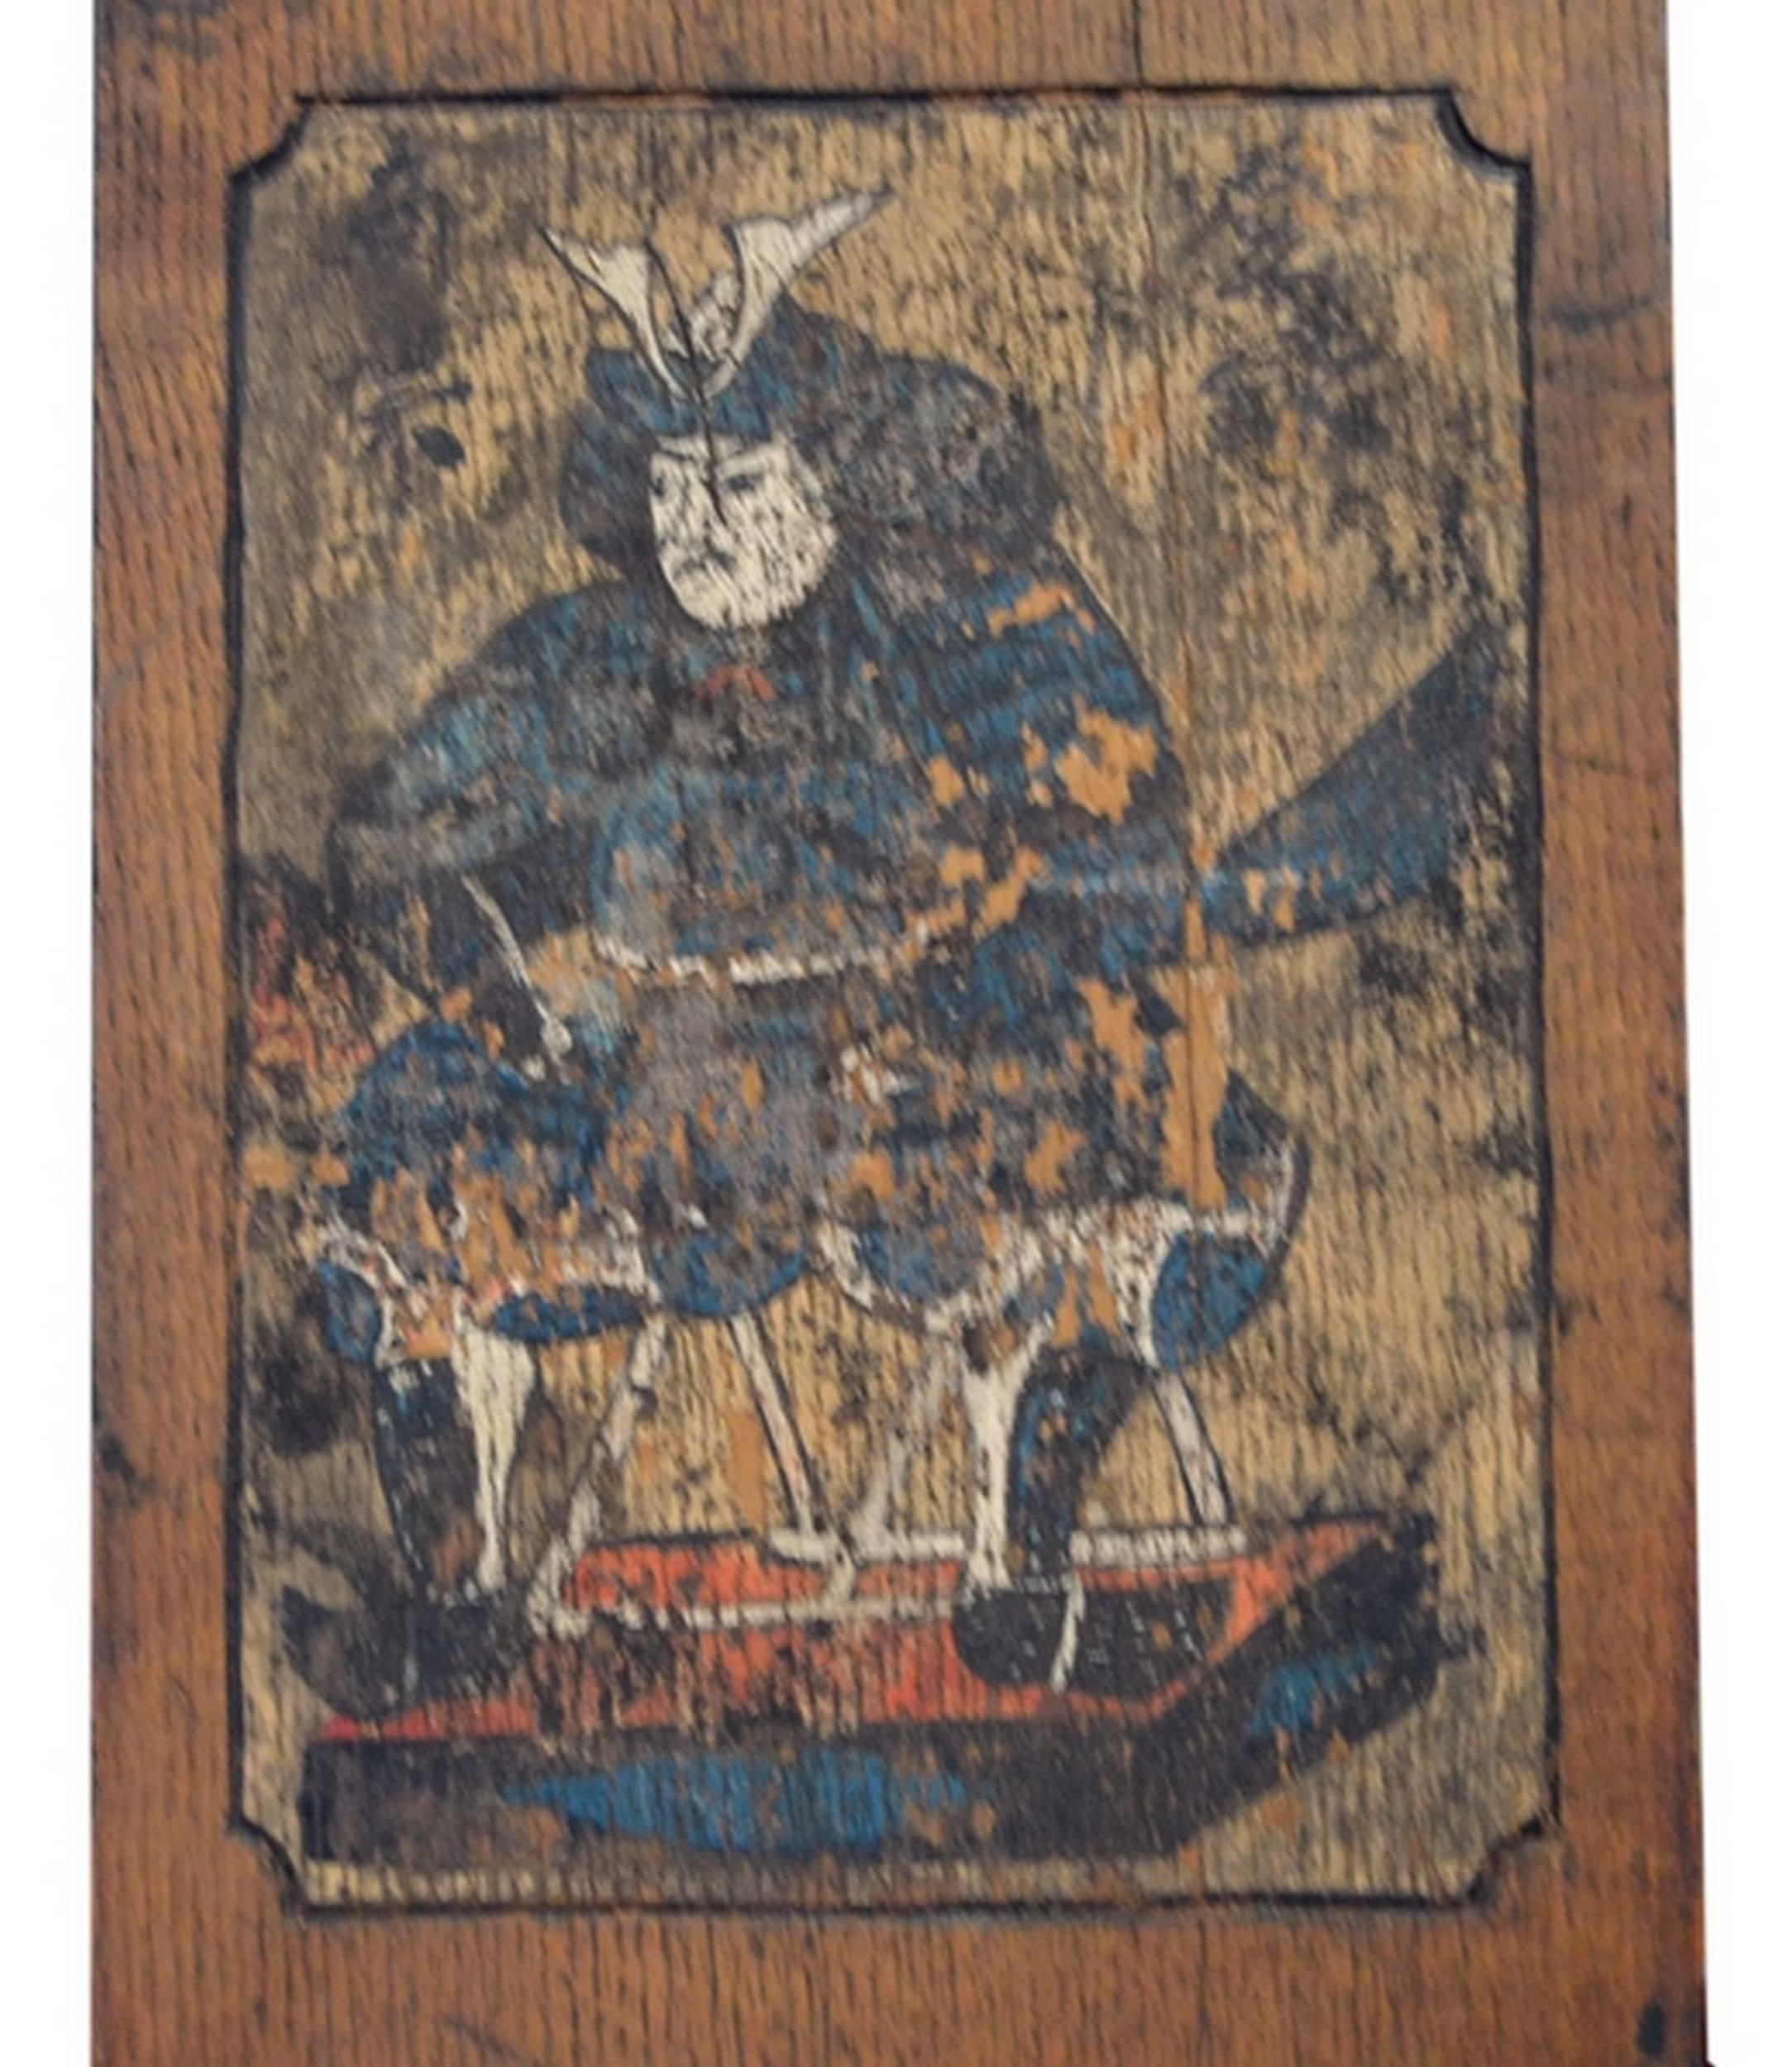 A Japanese carved and painted wooden sign with a Samurai from the Meiji Period, 19th century. This 19th century sign with a samurai was made in wood and painted in Japan during the Meiji period. The narrow rectangular panel features a painted frame